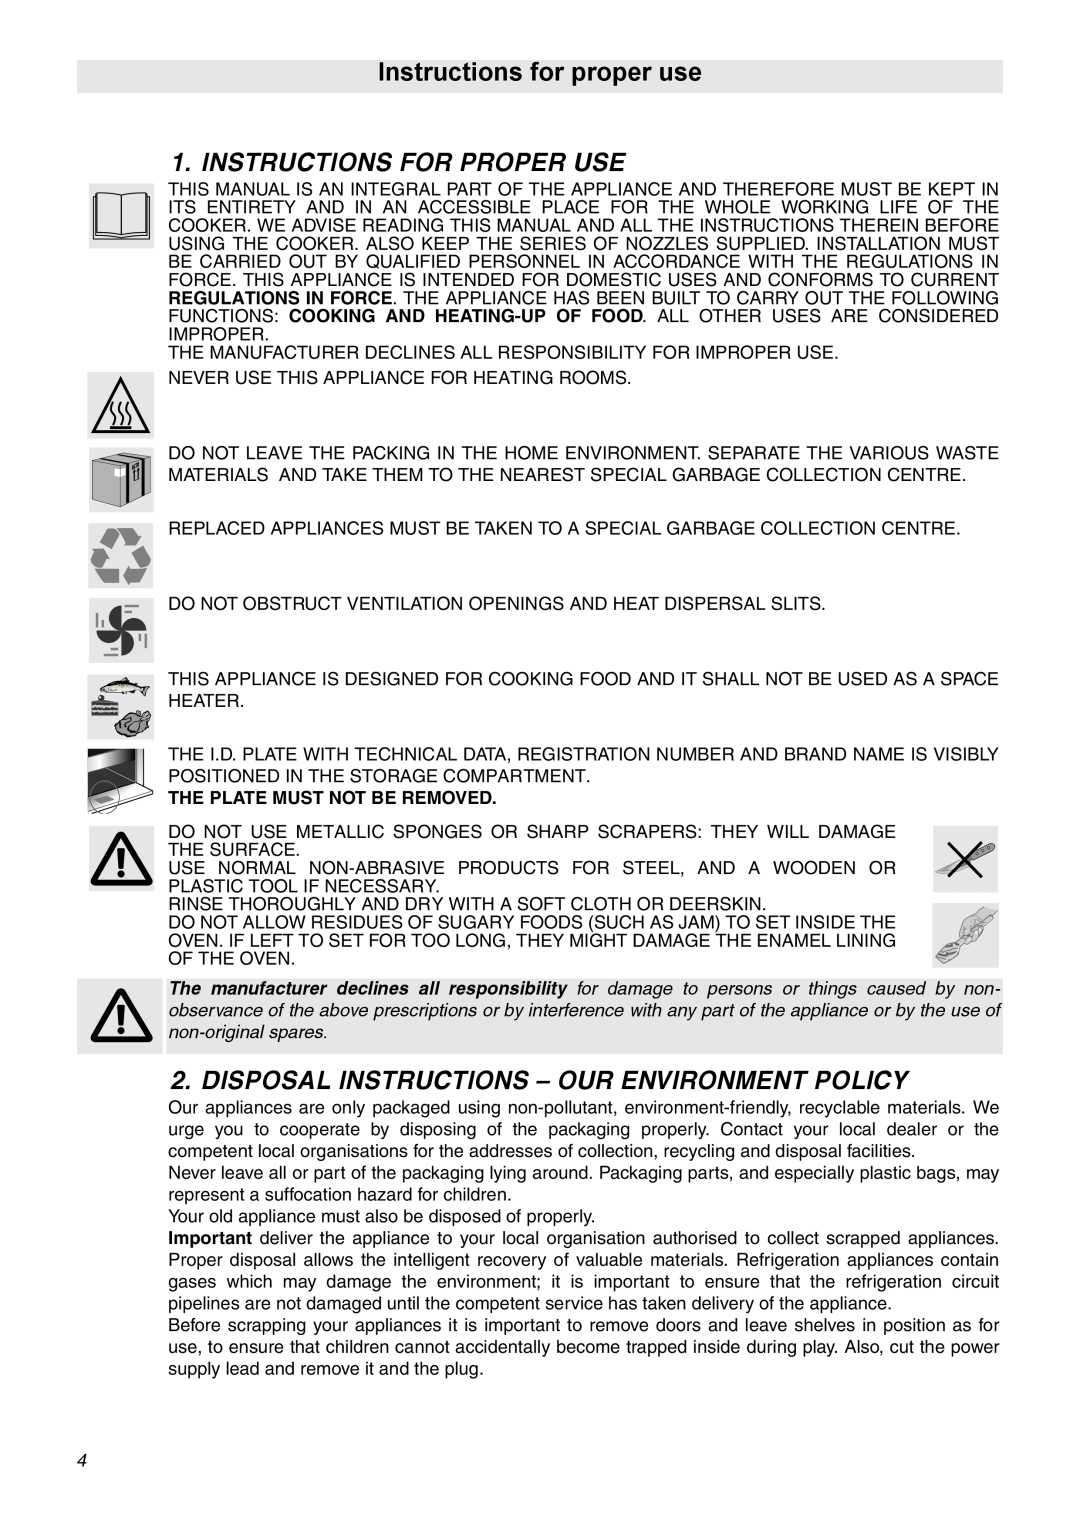 Smeg OF602XA Instructions for proper use, Instructions For Proper Use, Disposal Instructions - Our Environment Policy 